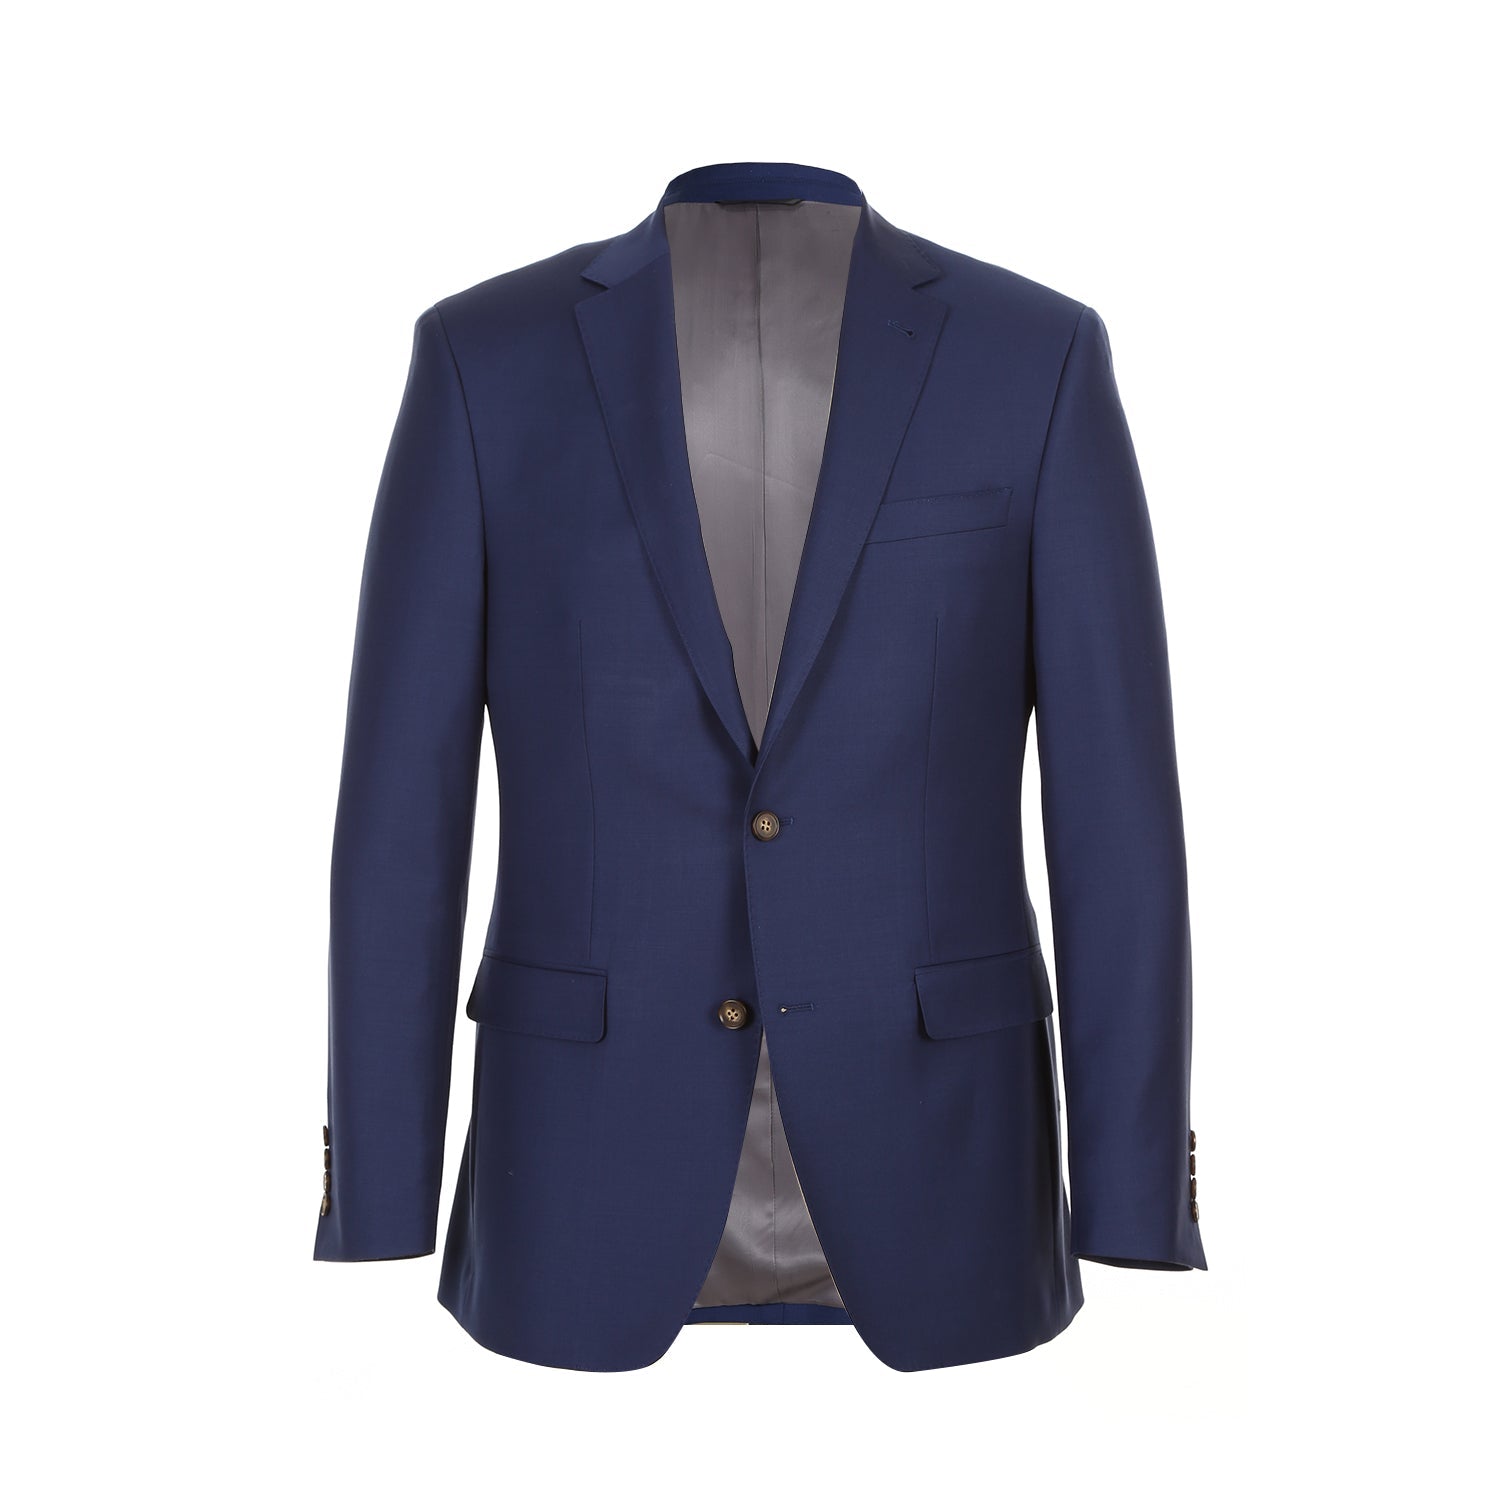 Super 150s Wool 2-Button Half-Canvas CLASSIC FIT Suit in Blue (Short, Regular, and Long Available) by Rivelino